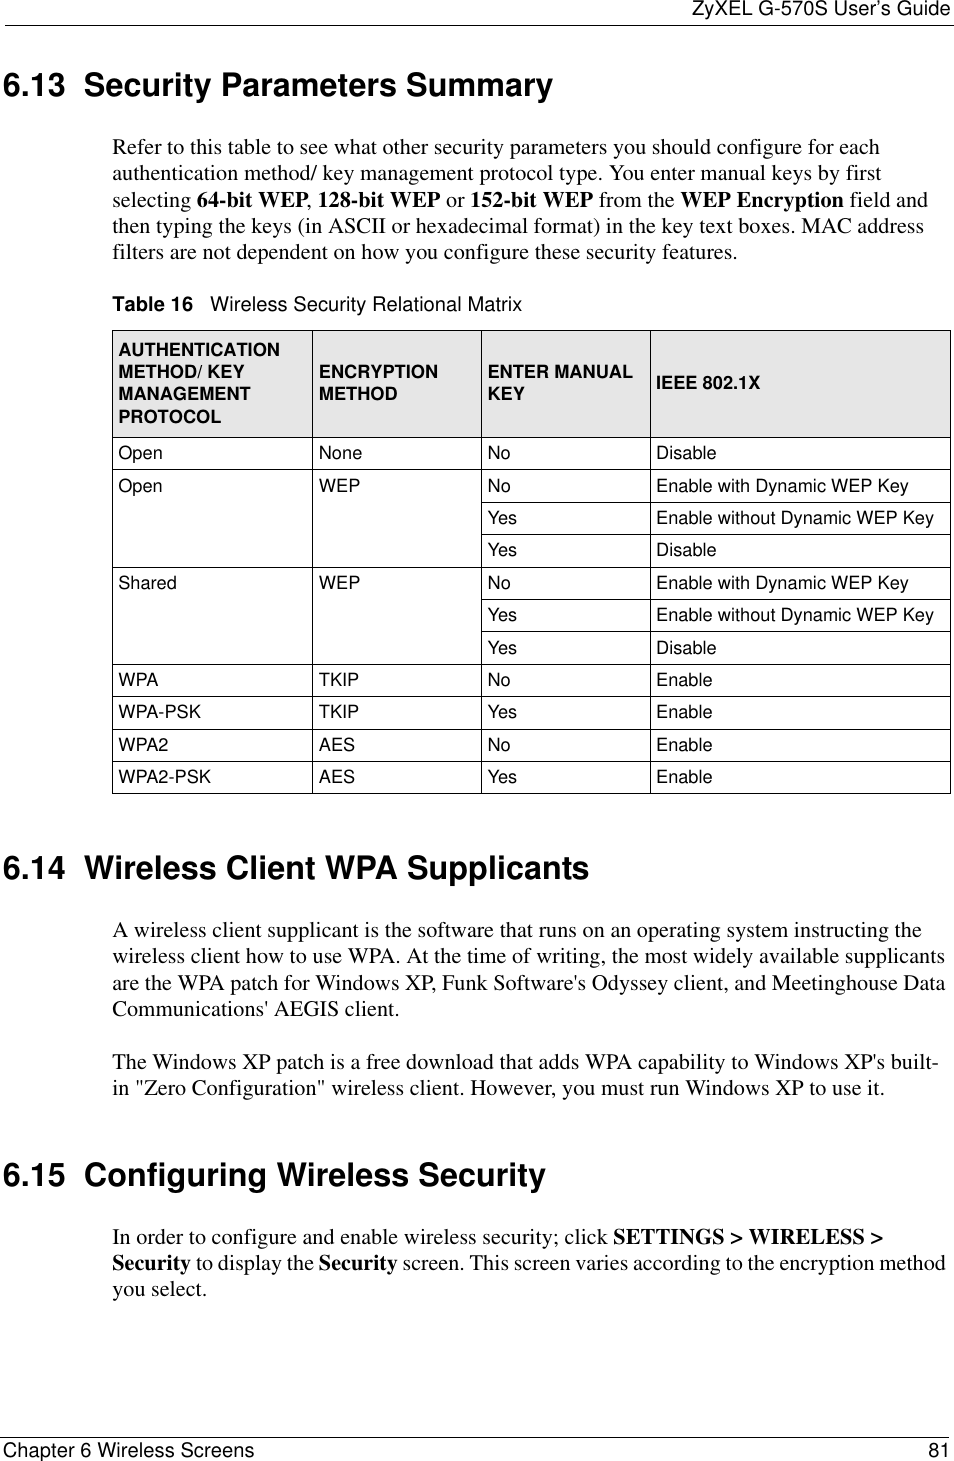 ZyXEL G-570S User’s GuideChapter 6 Wireless Screens 816.13  Security Parameters SummaryRefer to this table to see what other security parameters you should configure for each authentication method/ key management protocol type. You enter manual keys by first selecting 64-bit WEP,128-bit WEP or 152-bit WEP from the WEP Encryption field and then typing the keys (in ASCII or hexadecimal format) in the key text boxes. MAC address filters are not dependent on how you configure these security features.6.14  Wireless Client WPA SupplicantsA wireless client supplicant is the software that runs on an operating system instructing the wireless client how to use WPA. At the time of writing, the most widely available supplicants are the WPA patch for Windows XP, Funk Software&apos;s Odyssey client, and Meetinghouse Data Communications&apos; AEGIS client.  The Windows XP patch is a free download that adds WPA capability to Windows XP&apos;s built-in &quot;Zero Configuration&quot; wireless client. However, you must run Windows XP to use it.  6.15  Configuring Wireless Security In order to configure and enable wireless security; click SETTINGS &gt; WIRELESS &gt; Security to display the Security screen. This screen varies according to the encryption method you select. Table 16   Wireless Security Relational MatrixAUTHENTICATIONMETHOD/ KEY MANAGEMENTPROTOCOLENCRYPTIONMETHOD ENTER MANUAL KEY IEEE 802.1XOpen  None No DisableOpen WEP No           Enable with Dynamic WEP KeyYes Enable without Dynamic WEP KeyYes DisableShared WEP No           Enable with Dynamic WEP KeyYes Enable without Dynamic WEP KeyYes DisableWPA  TKIP No EnableWPA-PSK  TKIP Yes EnableWPA2 AES No EnableWPA2-PSK  AES Yes Enable